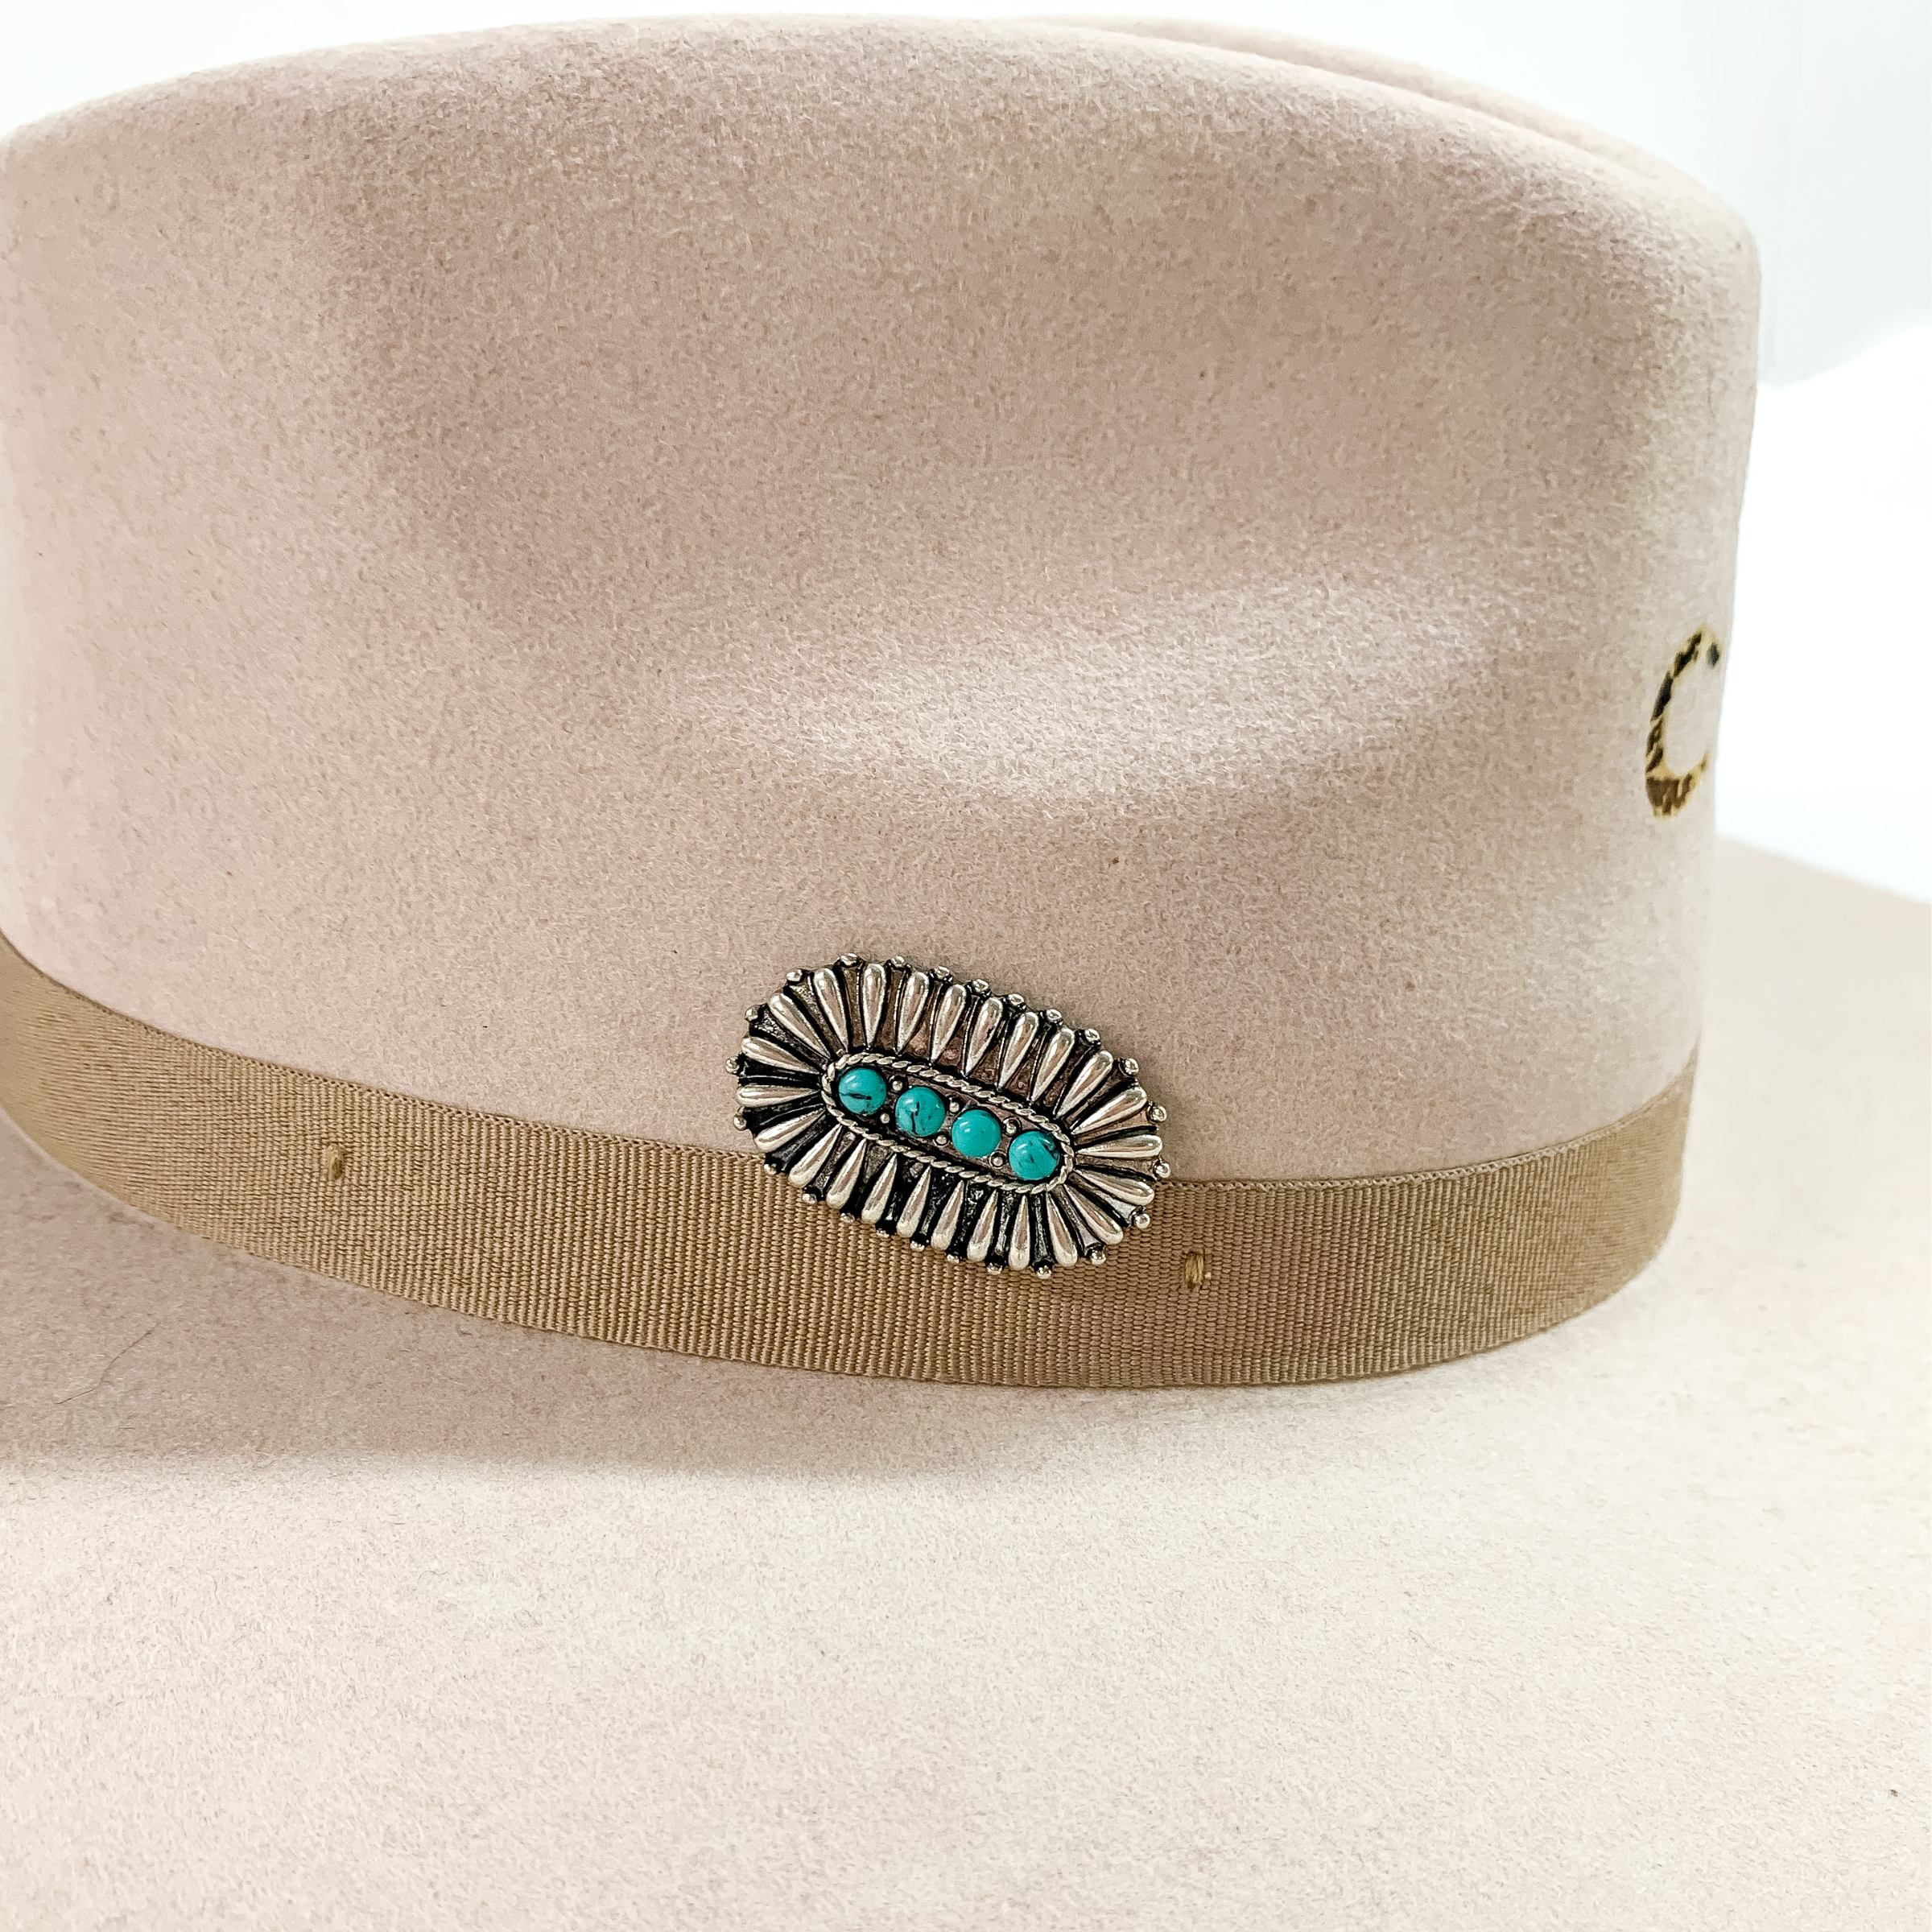 Oval Concho Hat Pin with Four Turquoise Stones in Silver Tone - Giddy Up Glamour Boutique